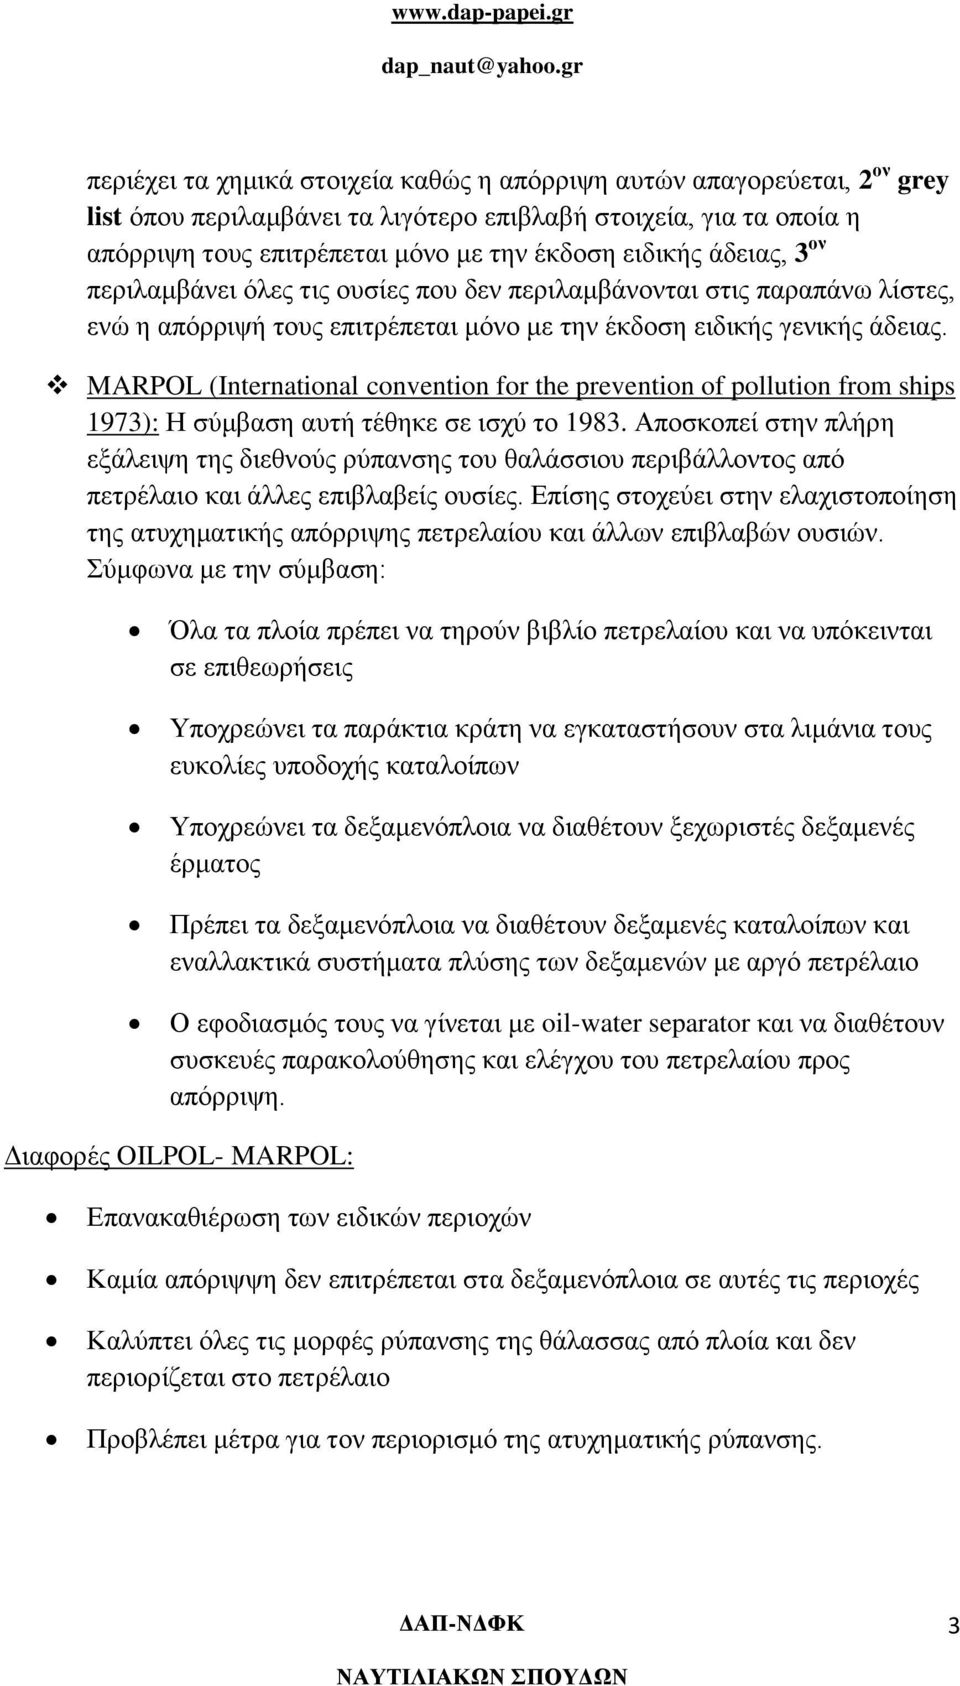 MARPOL (International convention for the prevention of pollution from ships 1973): Η σύμβαση αυτή τέθηκε σε ισχύ το 1983.